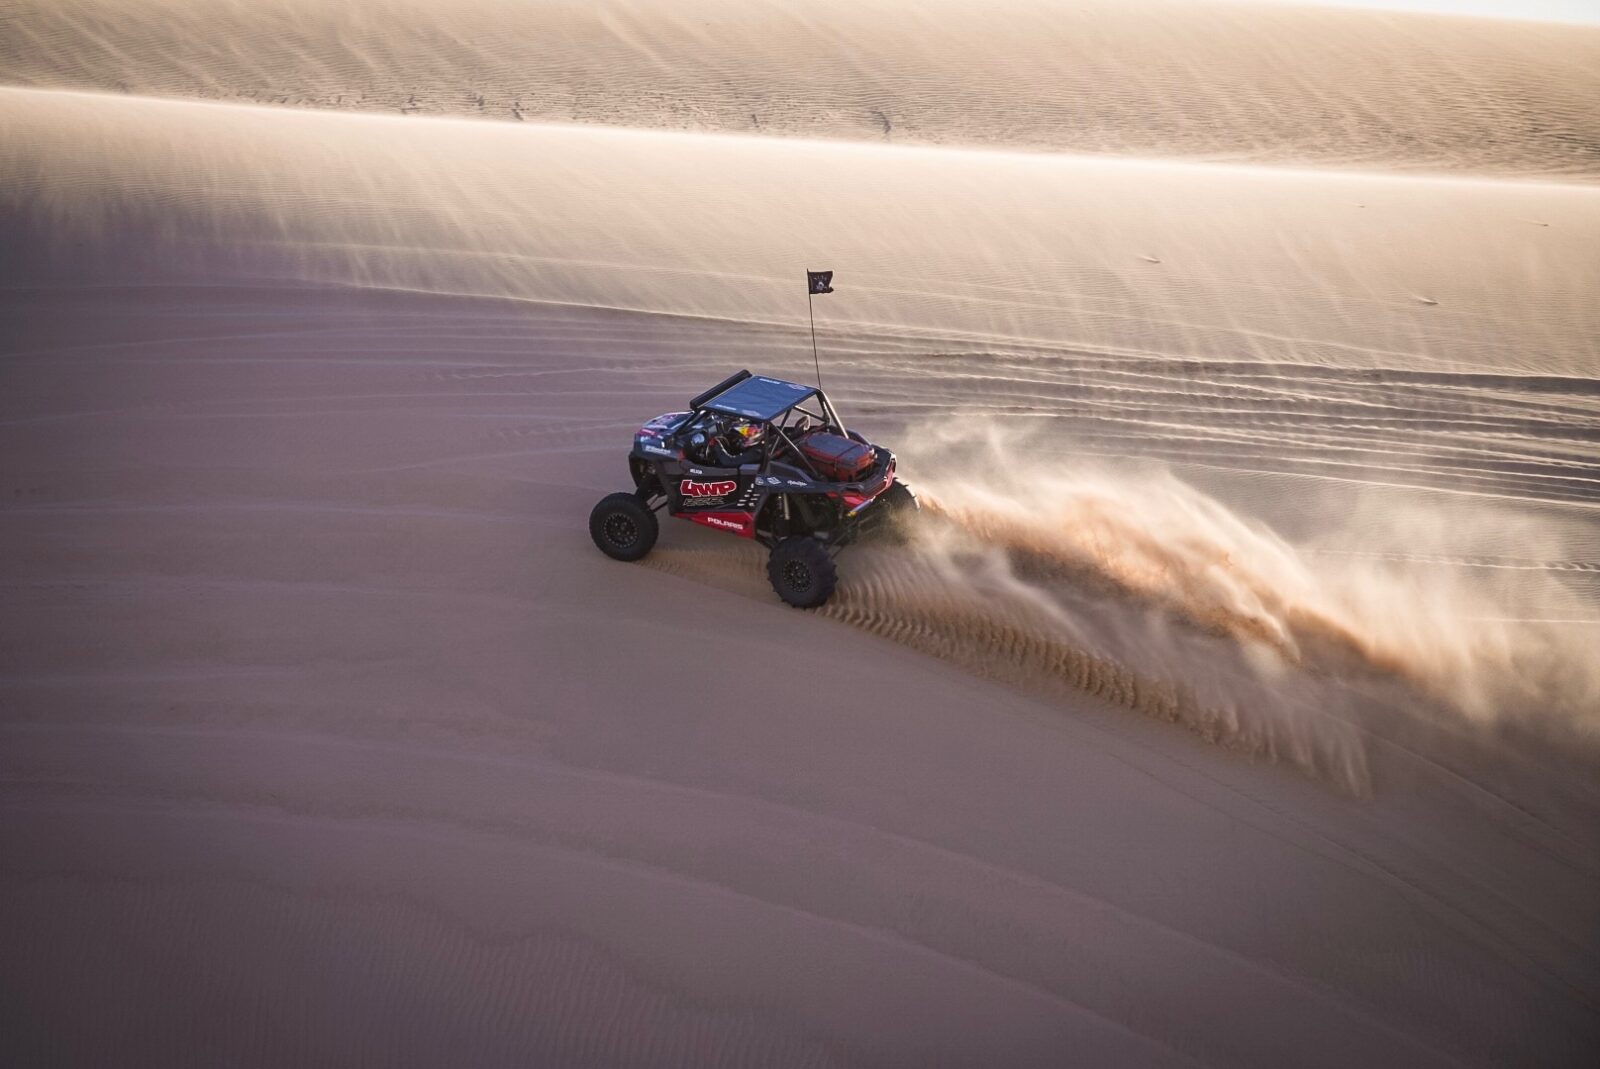 Side by side at Glamis Sand Dunes